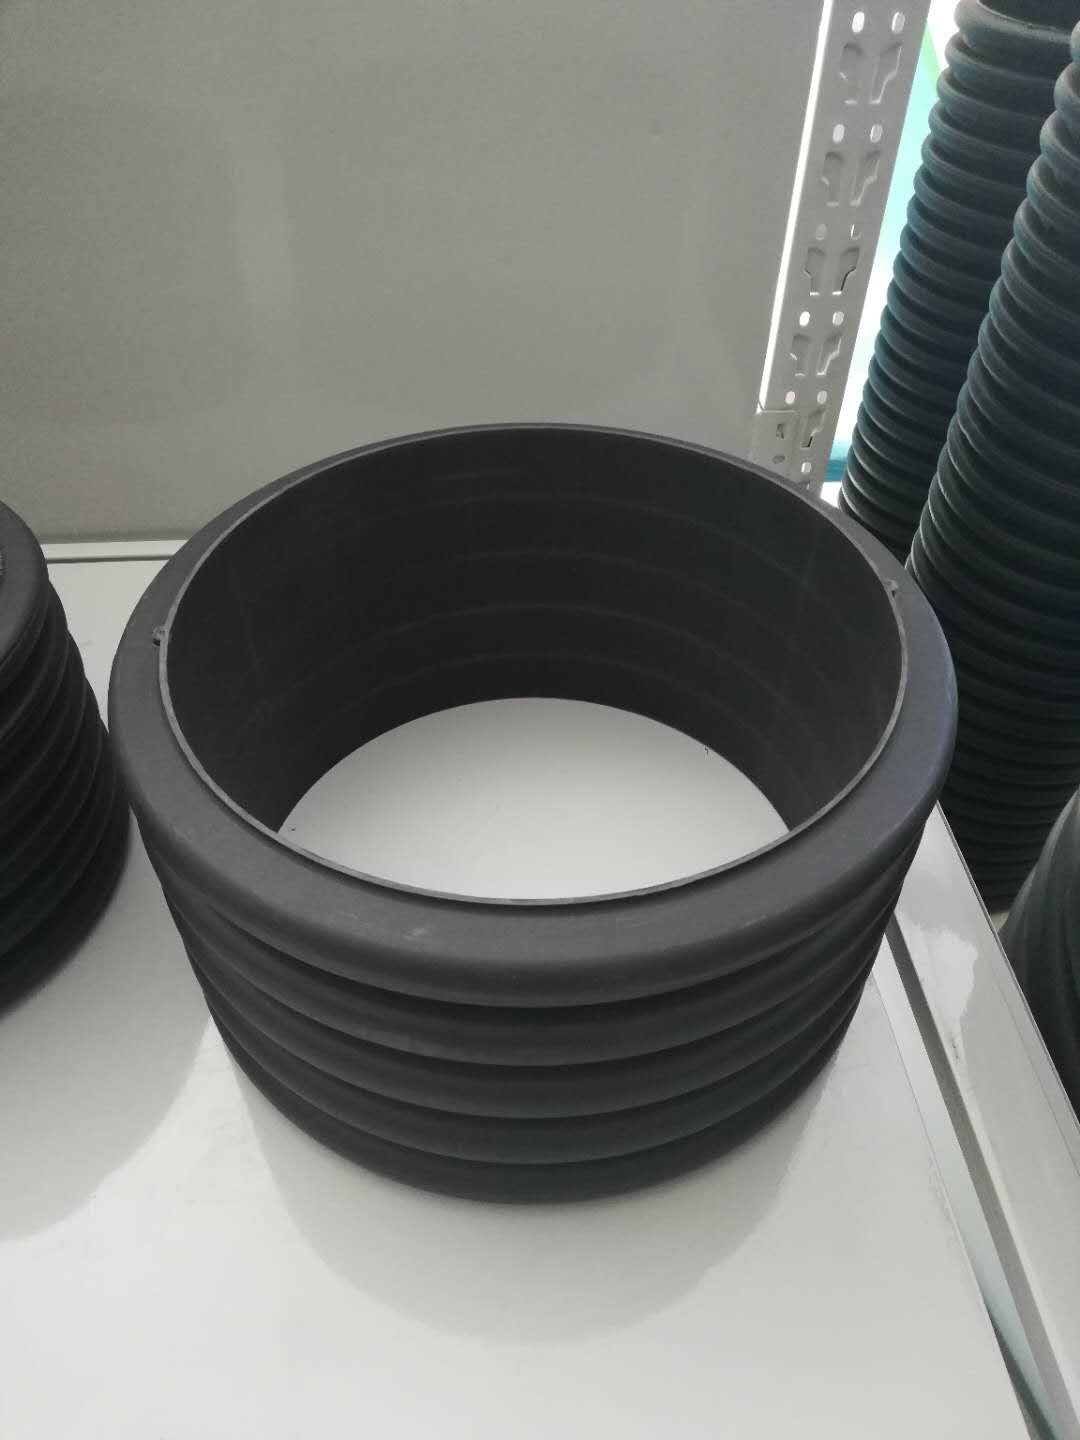 HDPE Draiange Pipe DWC HDPE Pipe Manufacturers, HDPE Draiange Pipe DWC HDPE Pipe Factory, Supply HDPE Draiange Pipe DWC HDPE Pipe